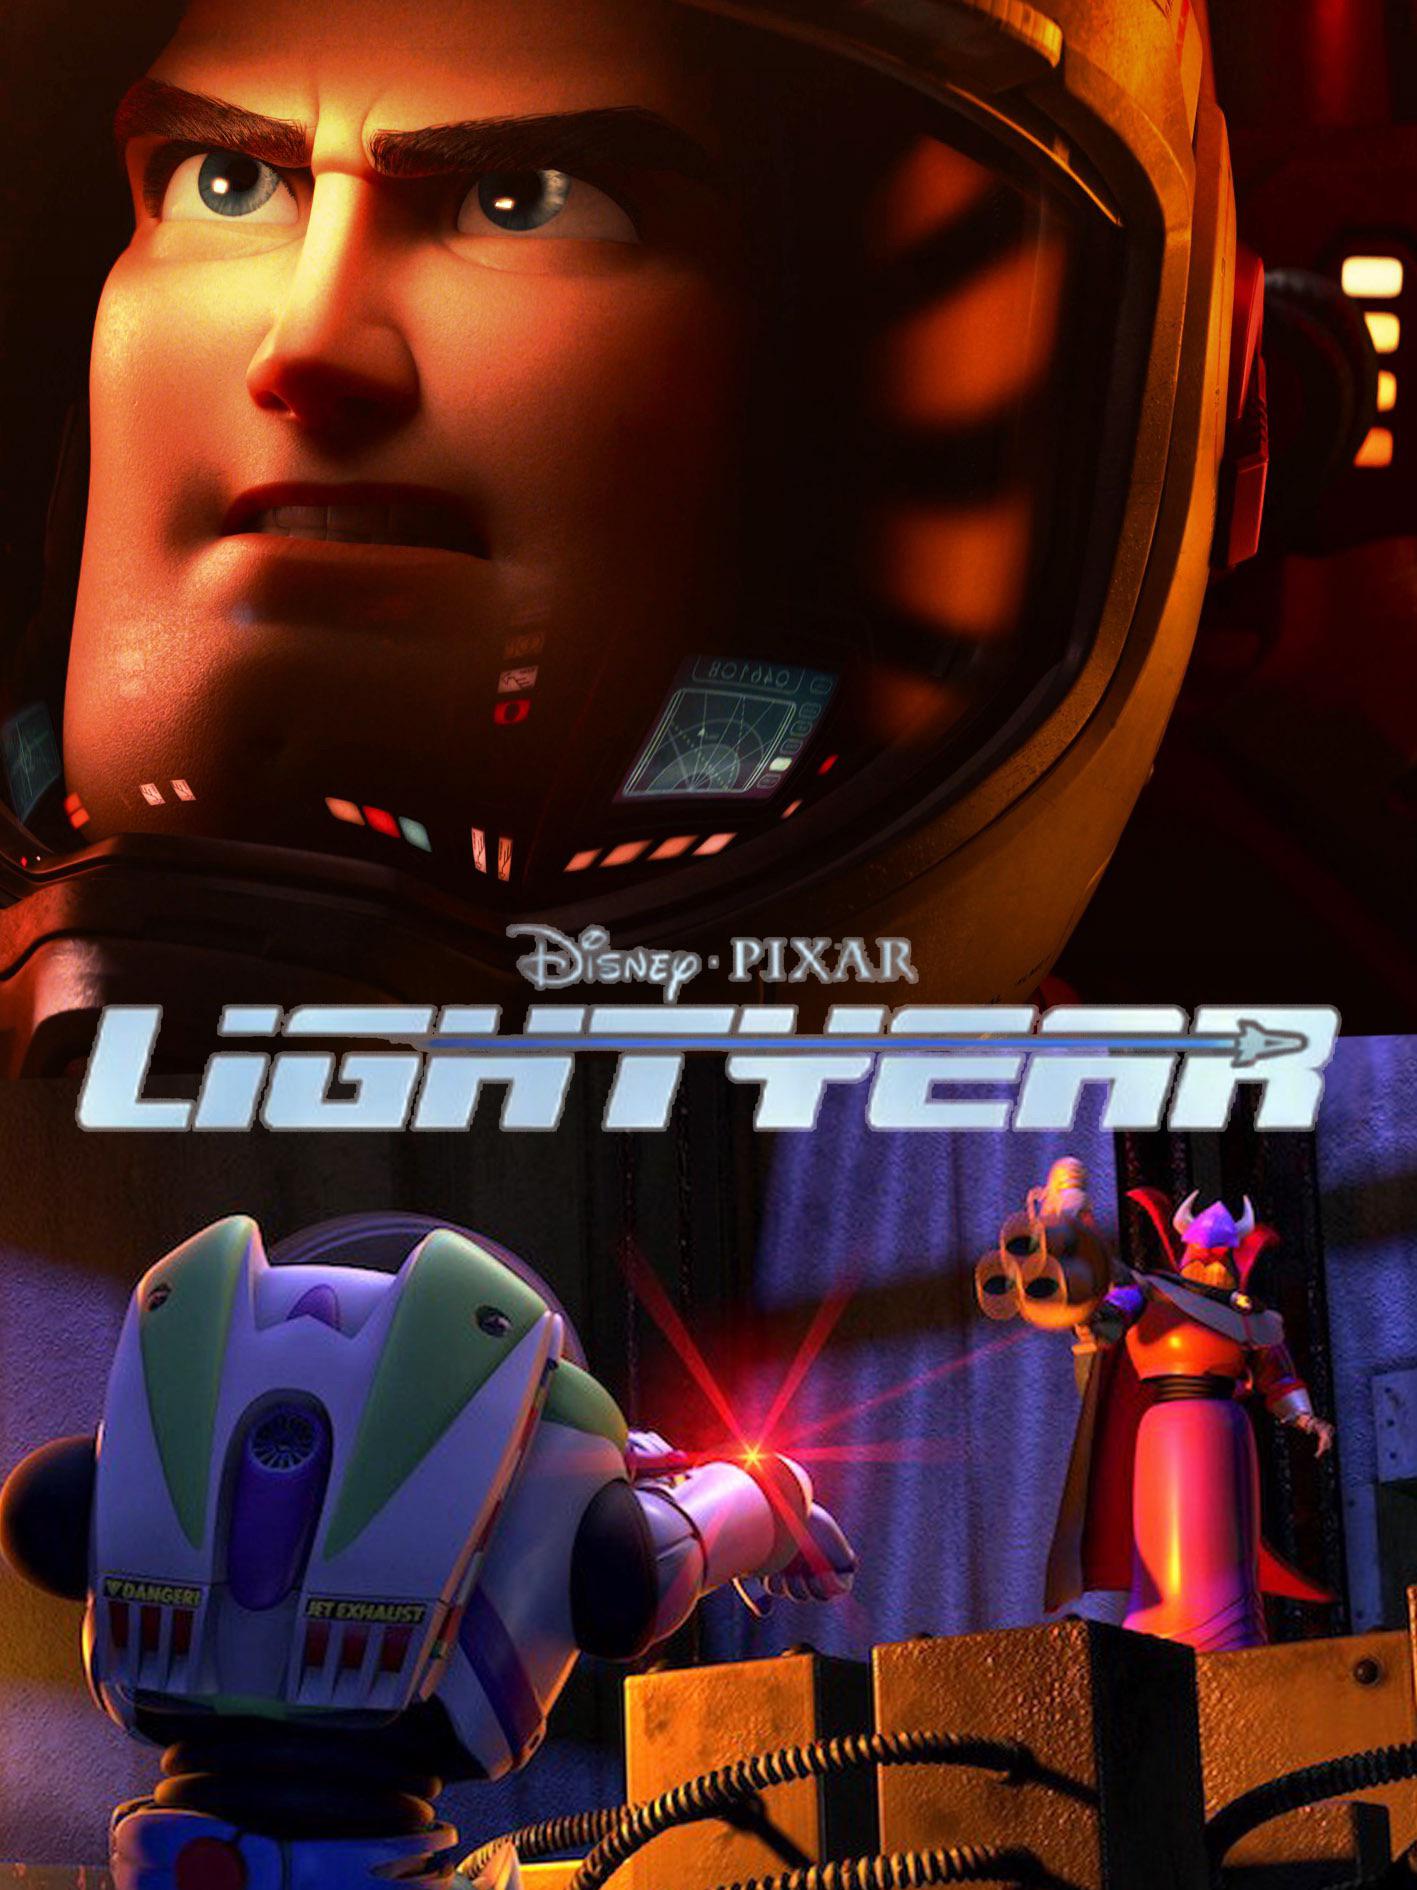 I made a movie poster for the Lightyear movie that was announced